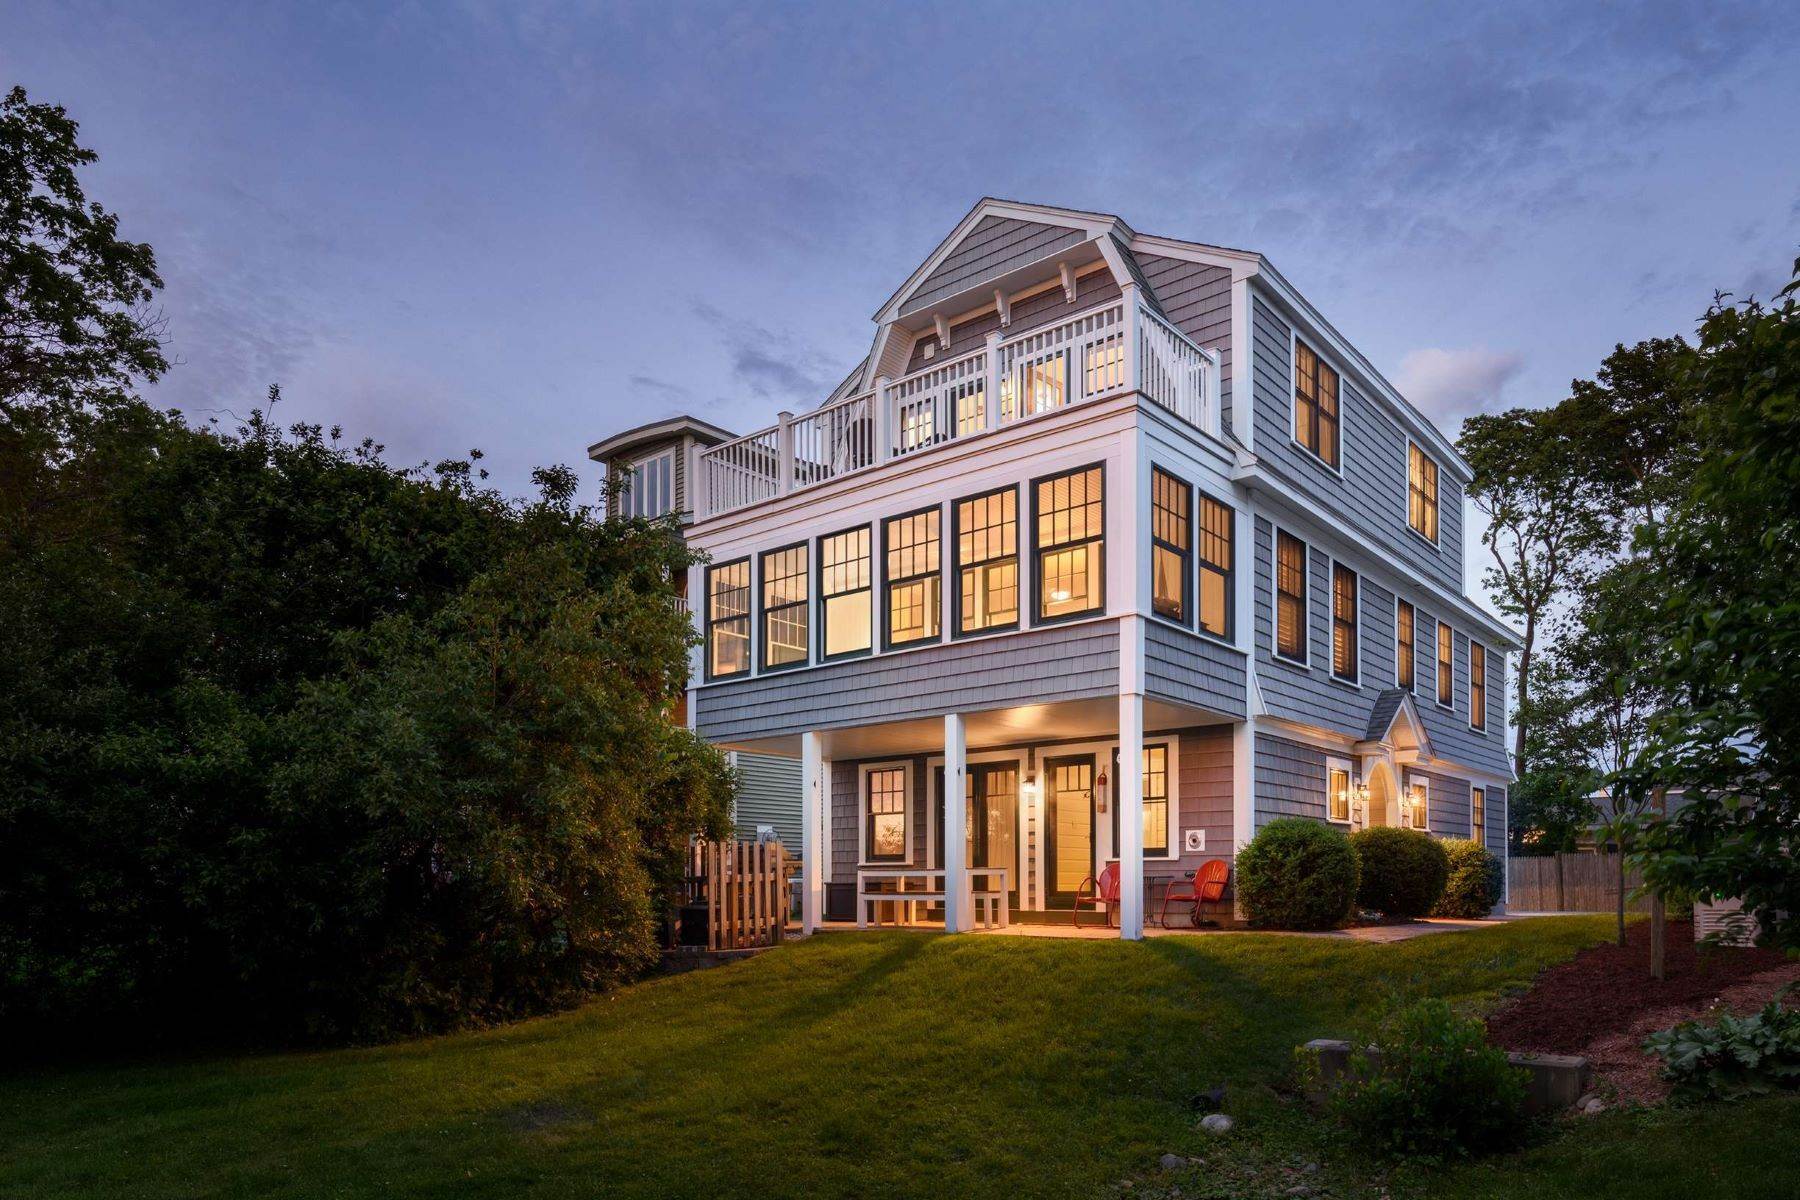 Property for Sale at Contemporary Residence with Ocean & Marsh Views in Hampton 7 Witch Island Way, Hampton, NH 03842